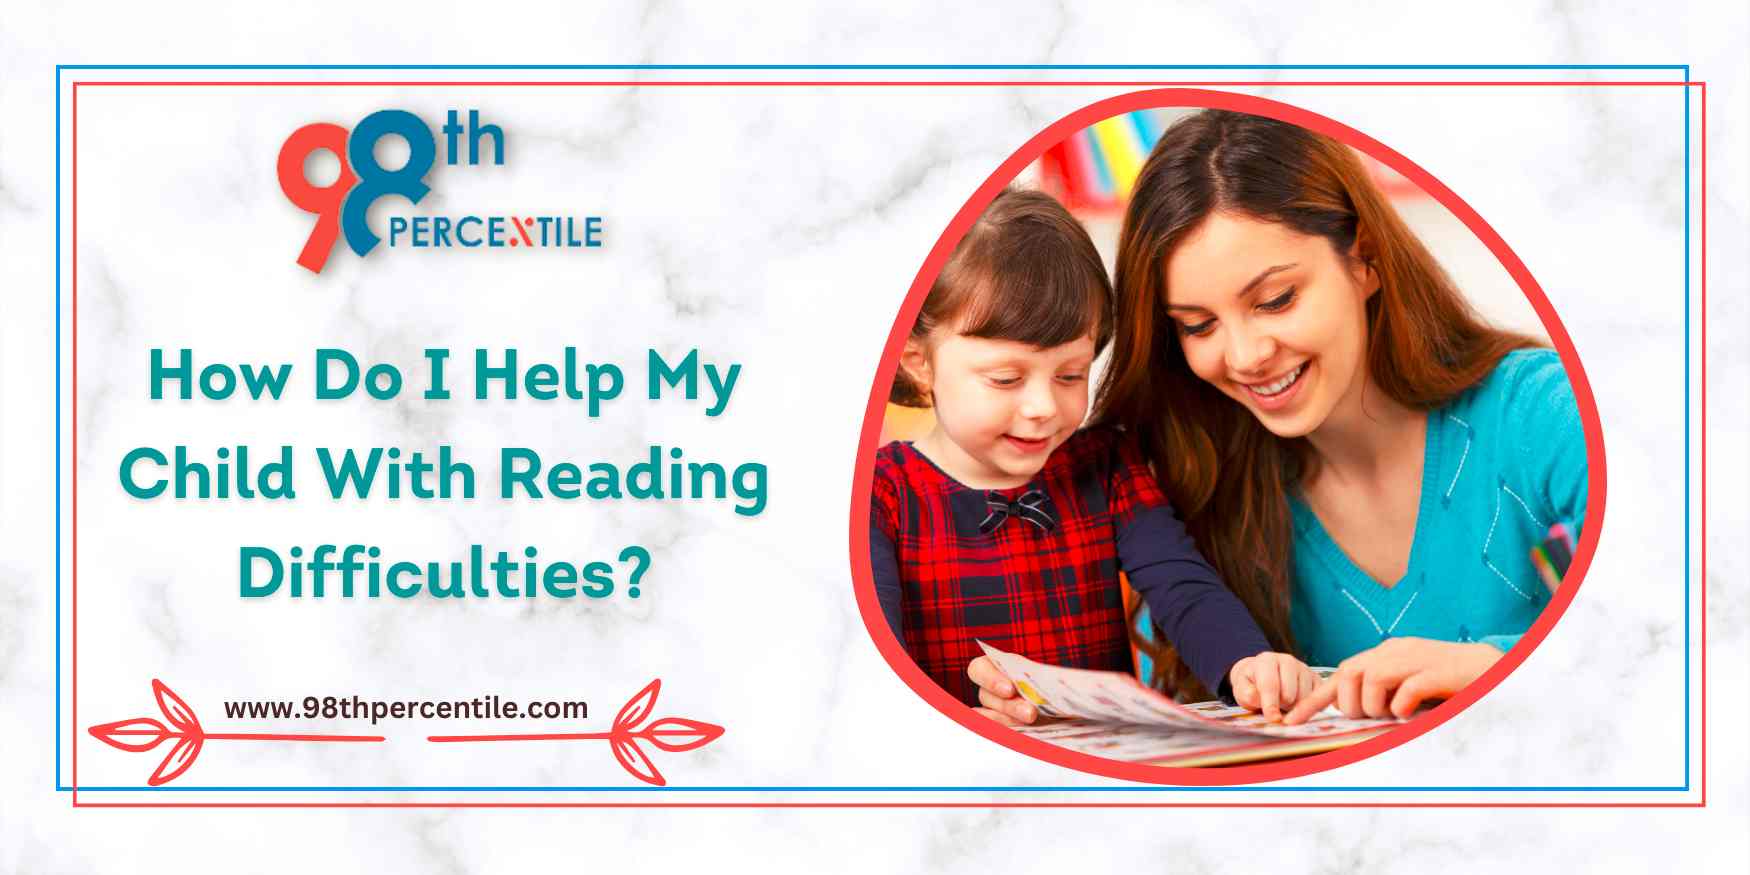 How Do I Help My Child with Reading Difficulties